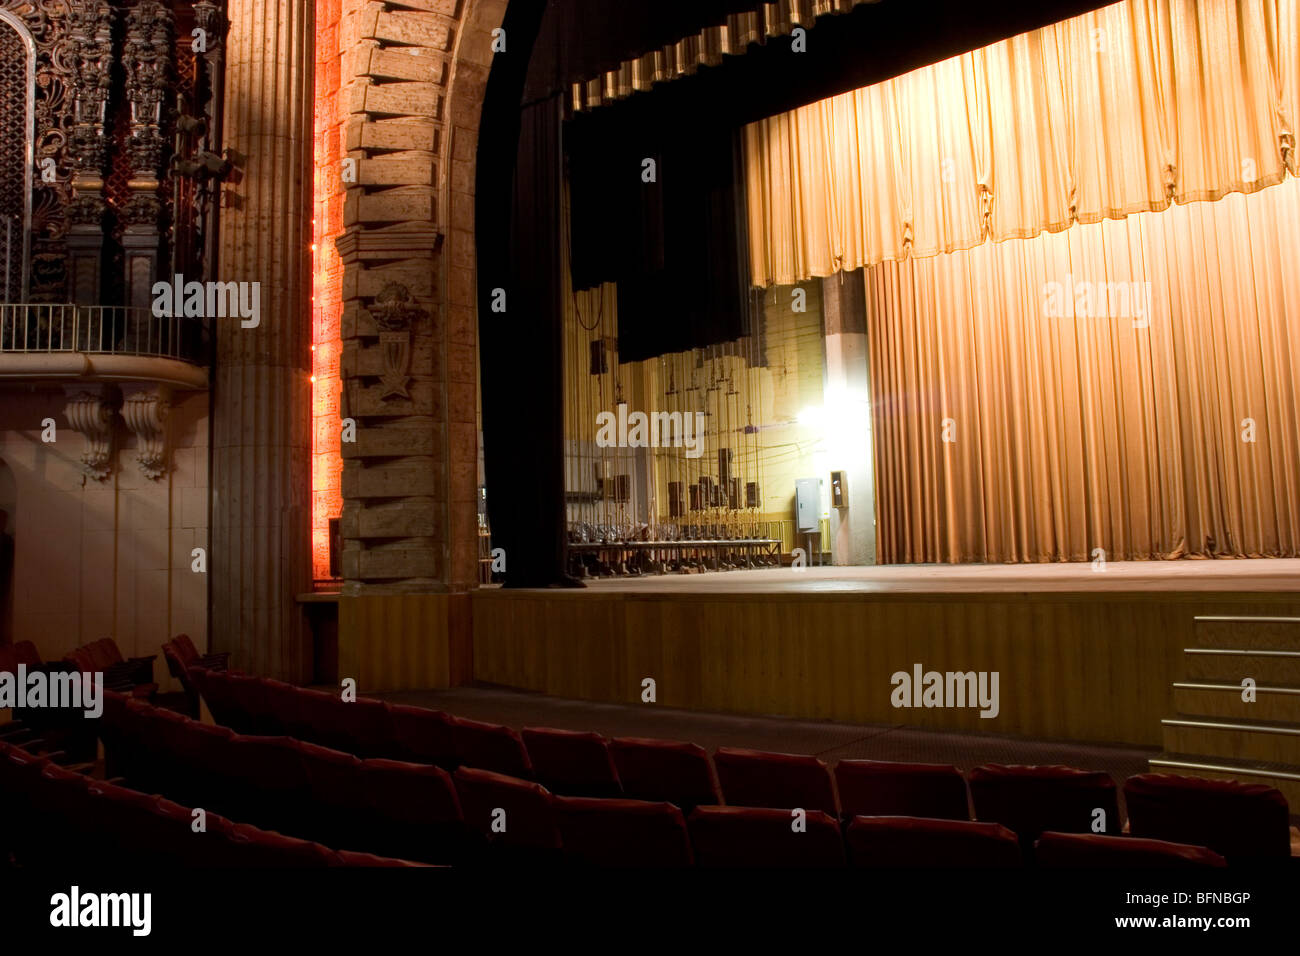 Interior of the old Million Dollar Theatre, Broadway, Los Angeles Stock Photo